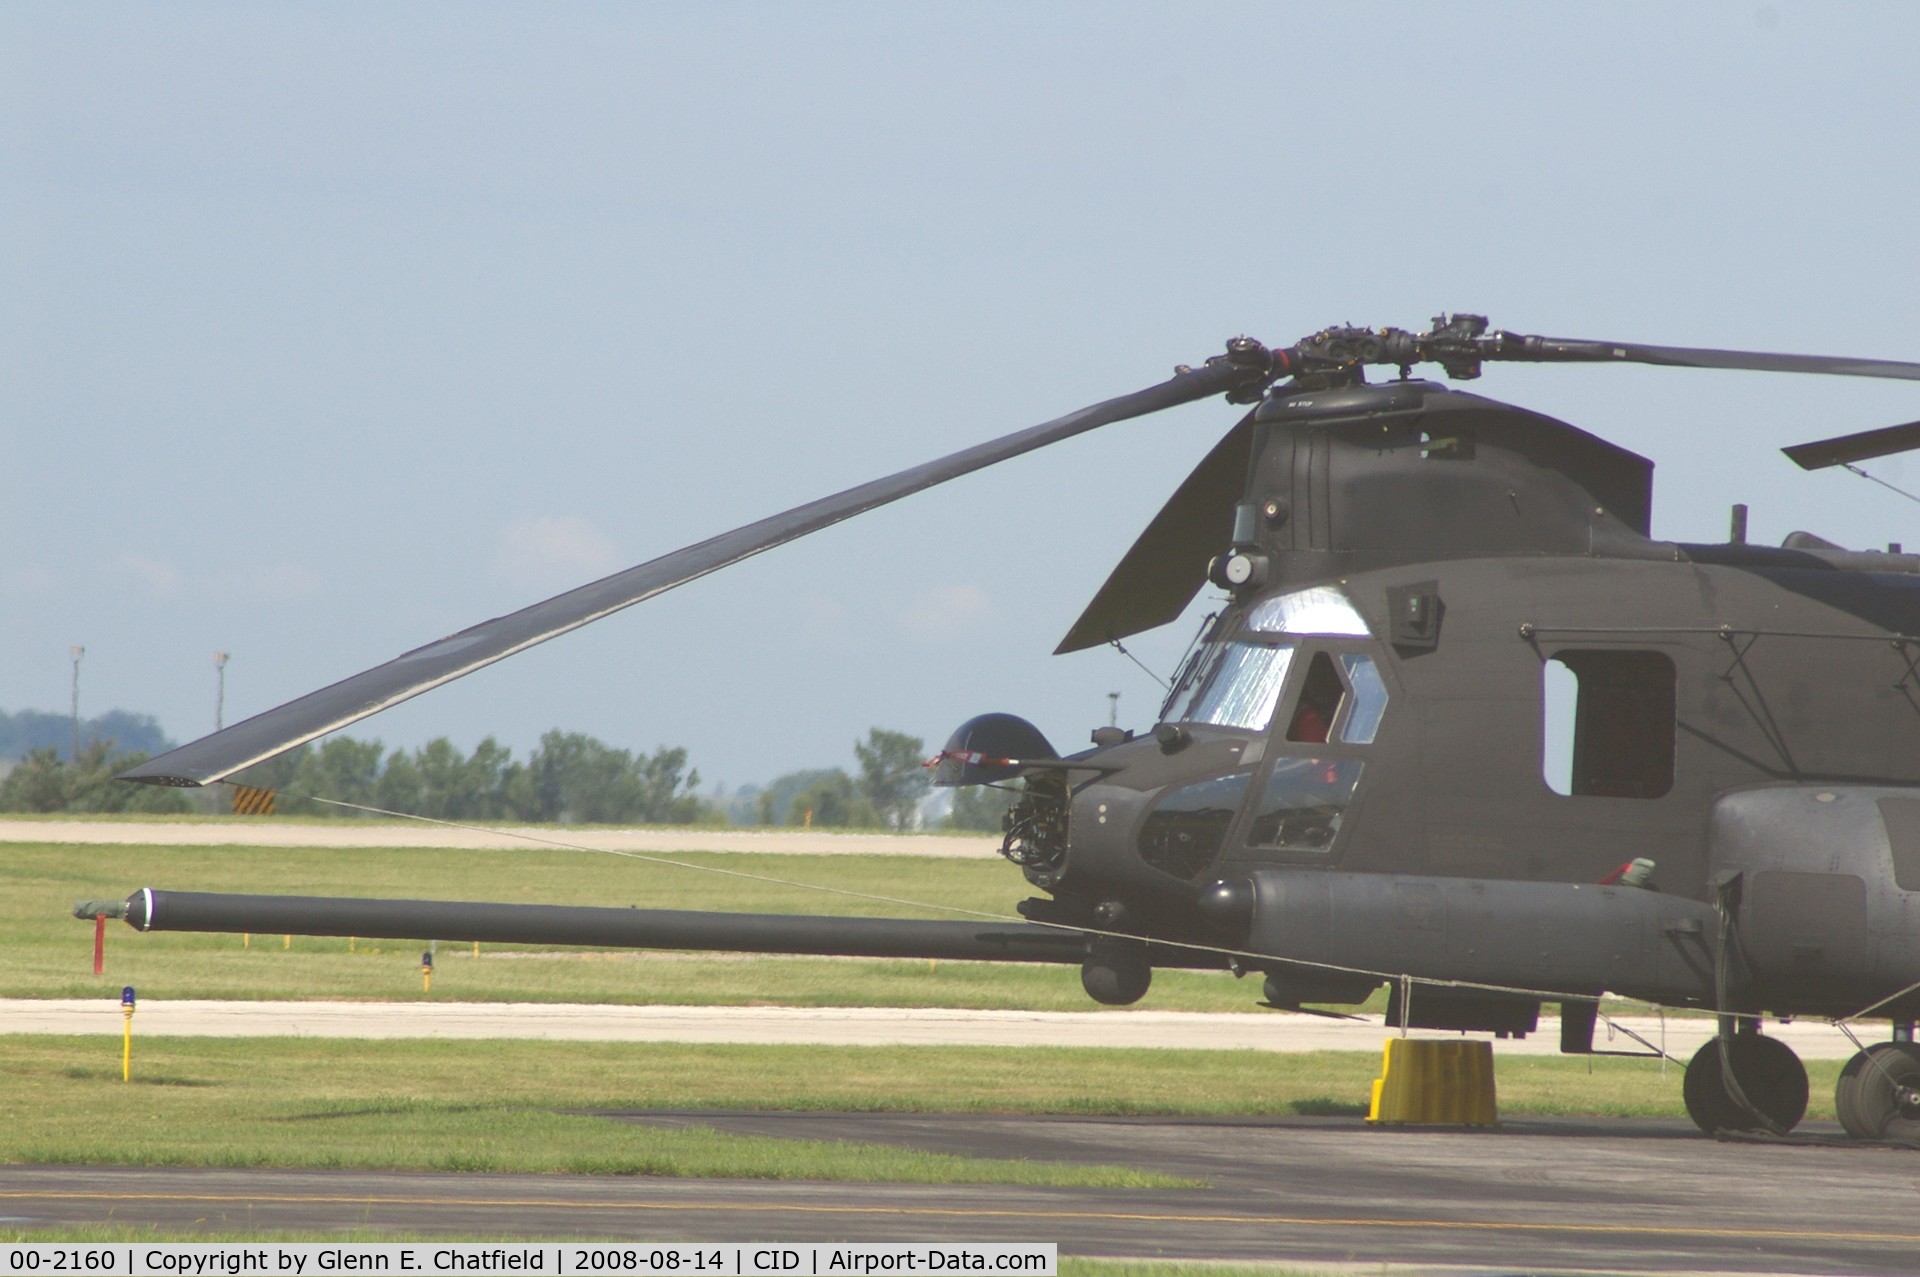 00-2160, 2000 Boeing MH-47G Chinook C/N M.3726, Taken from a parking lot